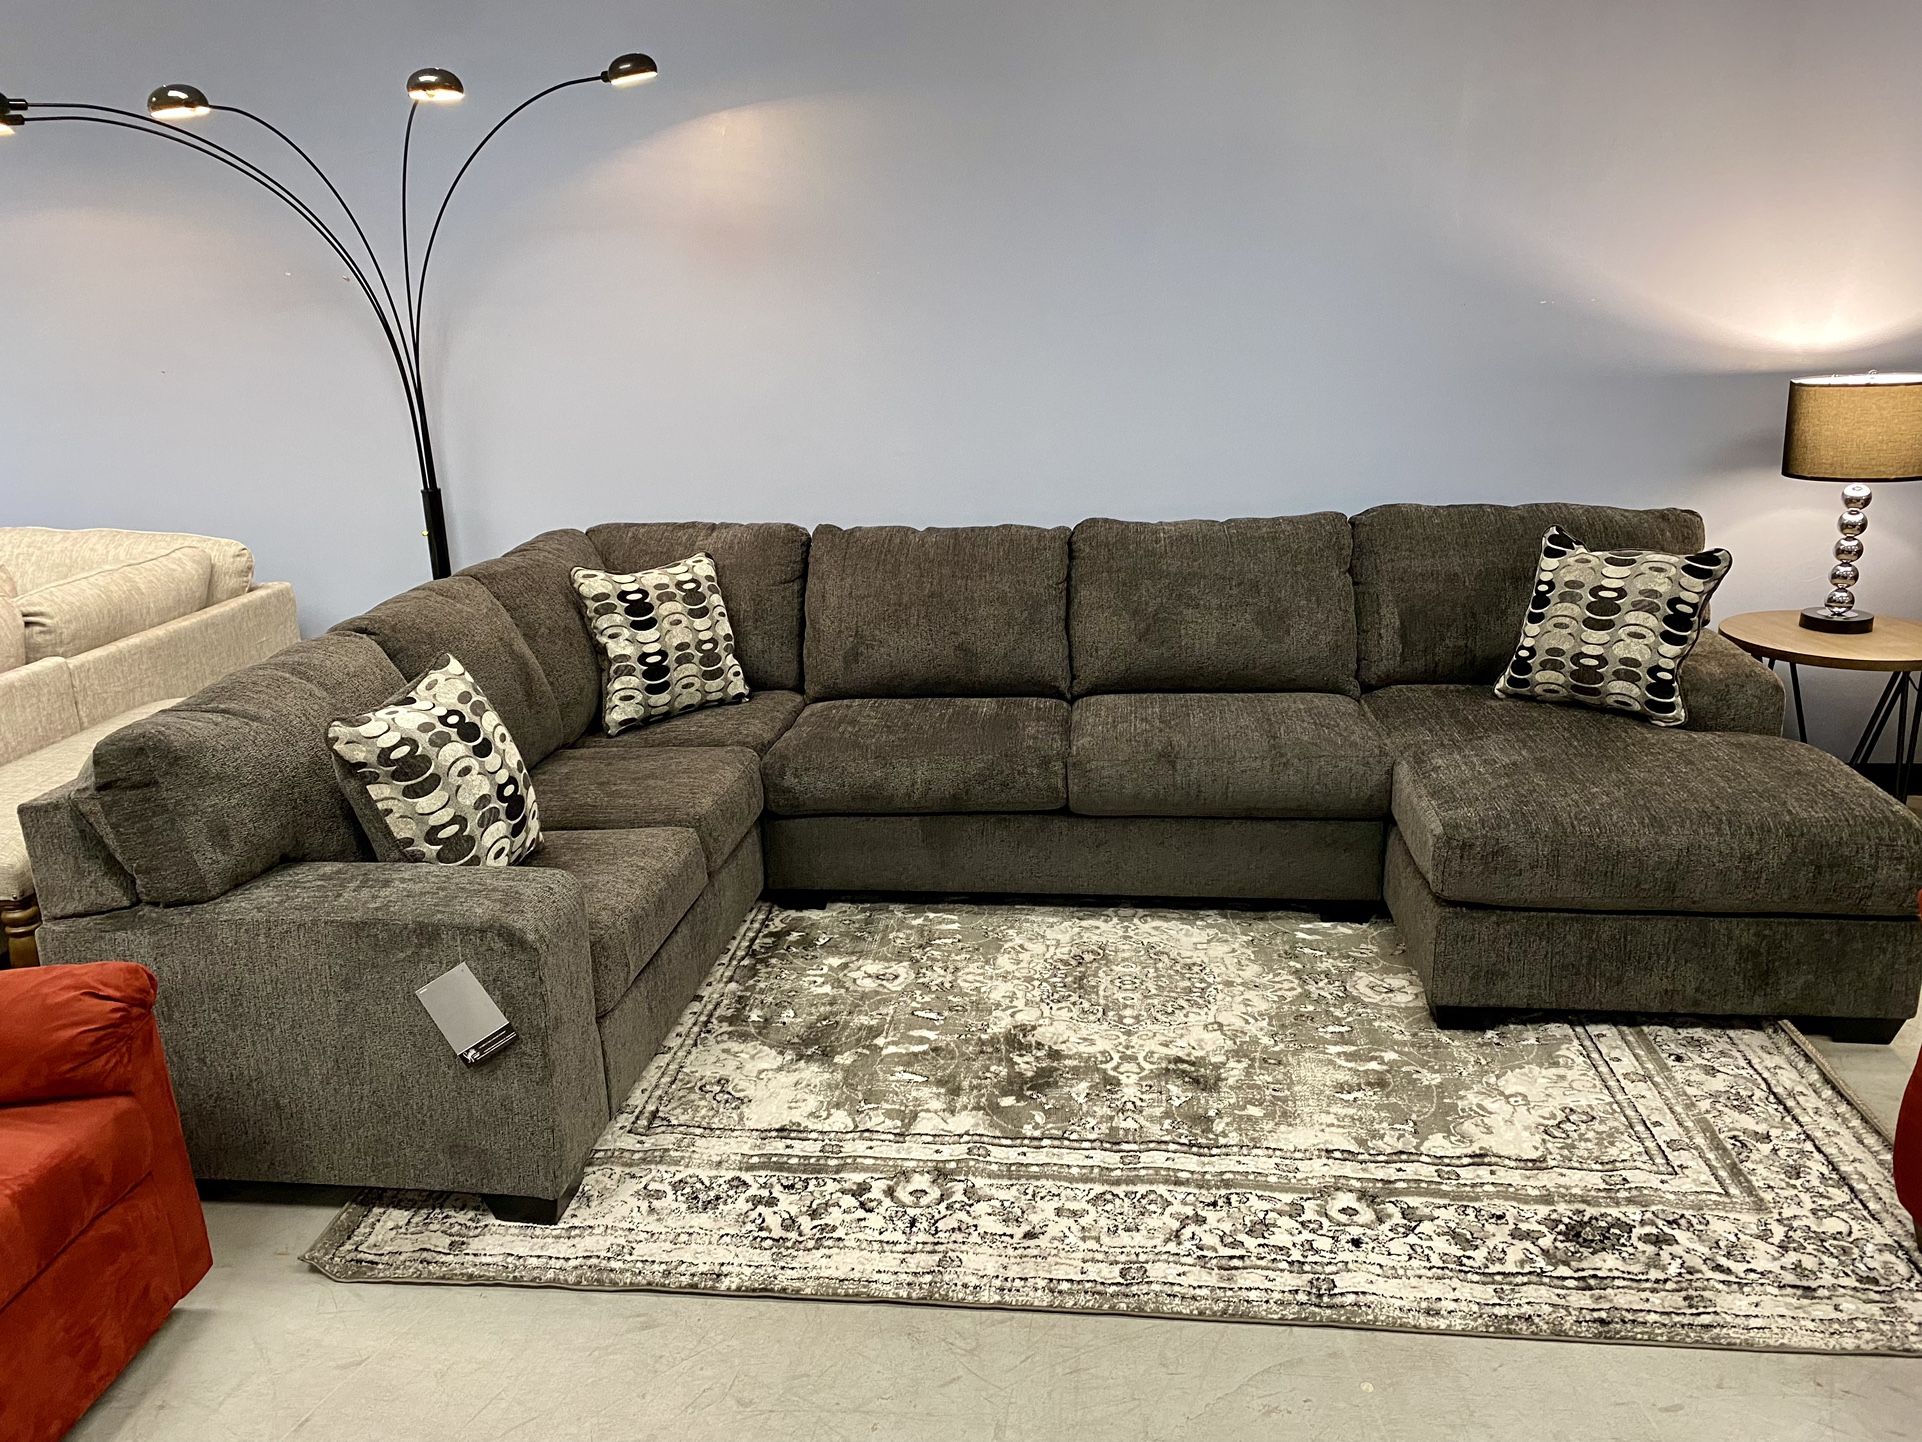 Ballinasloe Modular Sectional, Double Chaise, Living Room Set, Sofa, Loveseat, Couch , Recliner Options